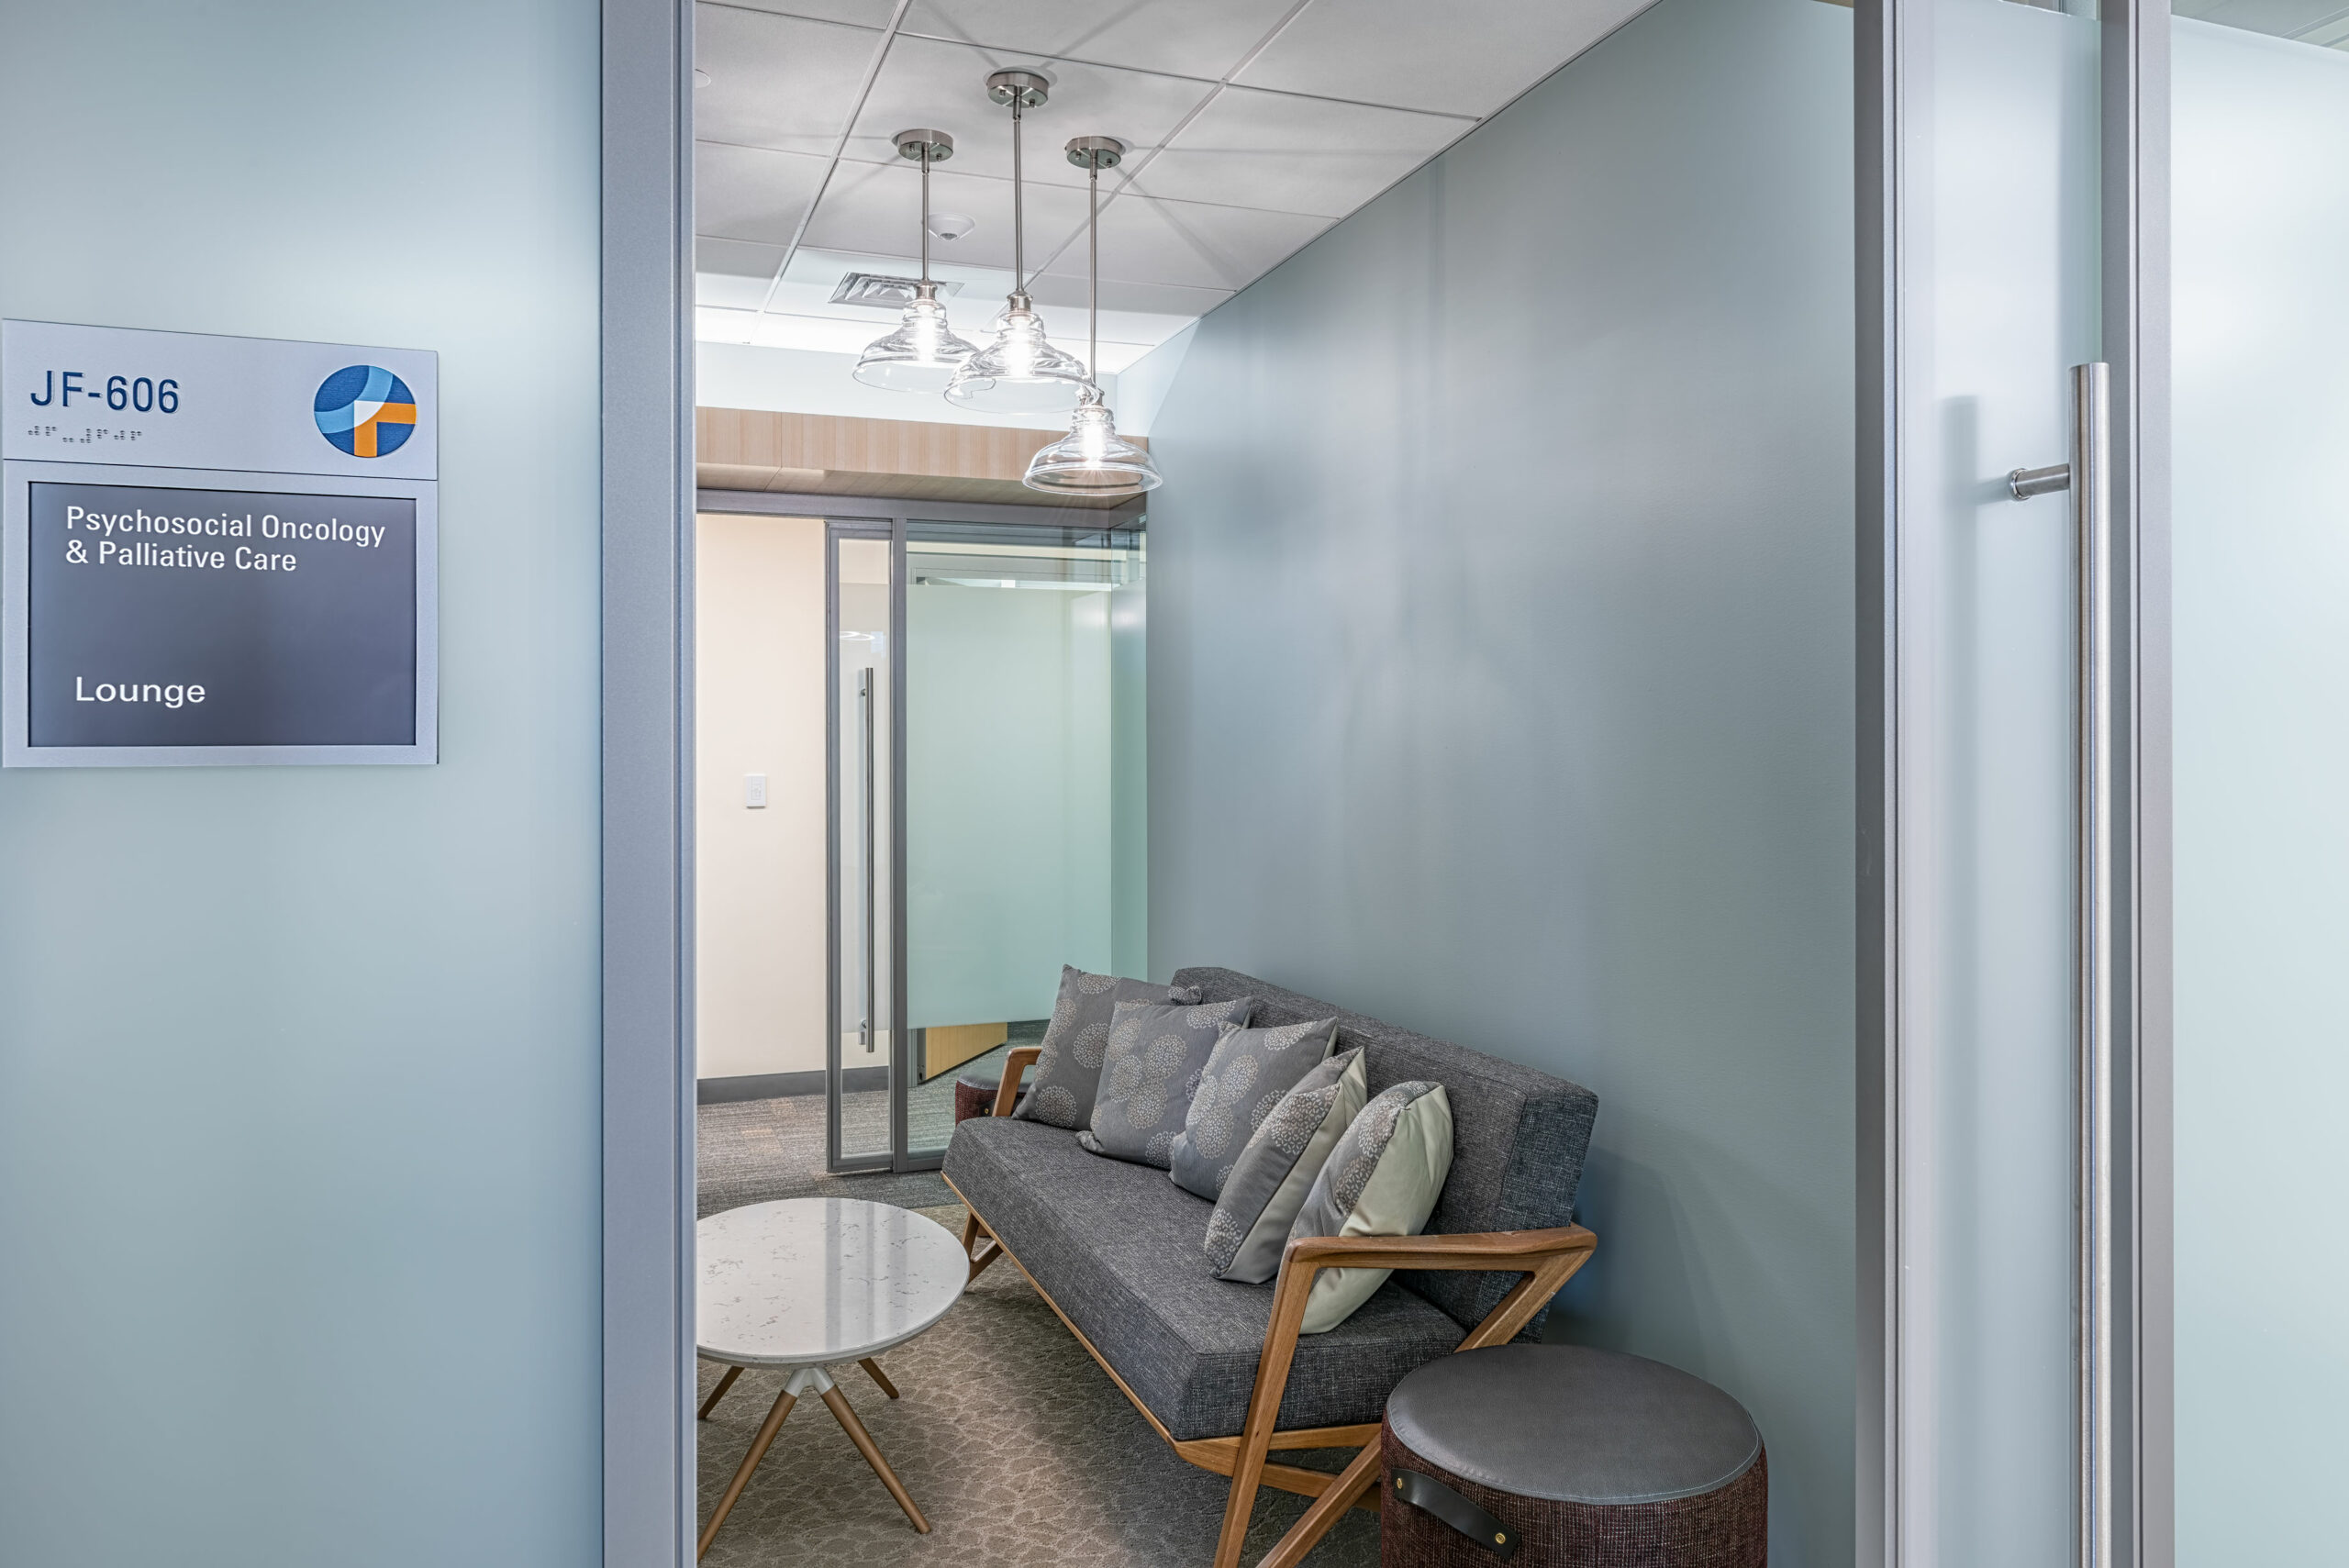 Wise Creates a Modern, Tranquil Office Space for Dana-Farber’s Department of Psychosocial Oncology and Palliative Care